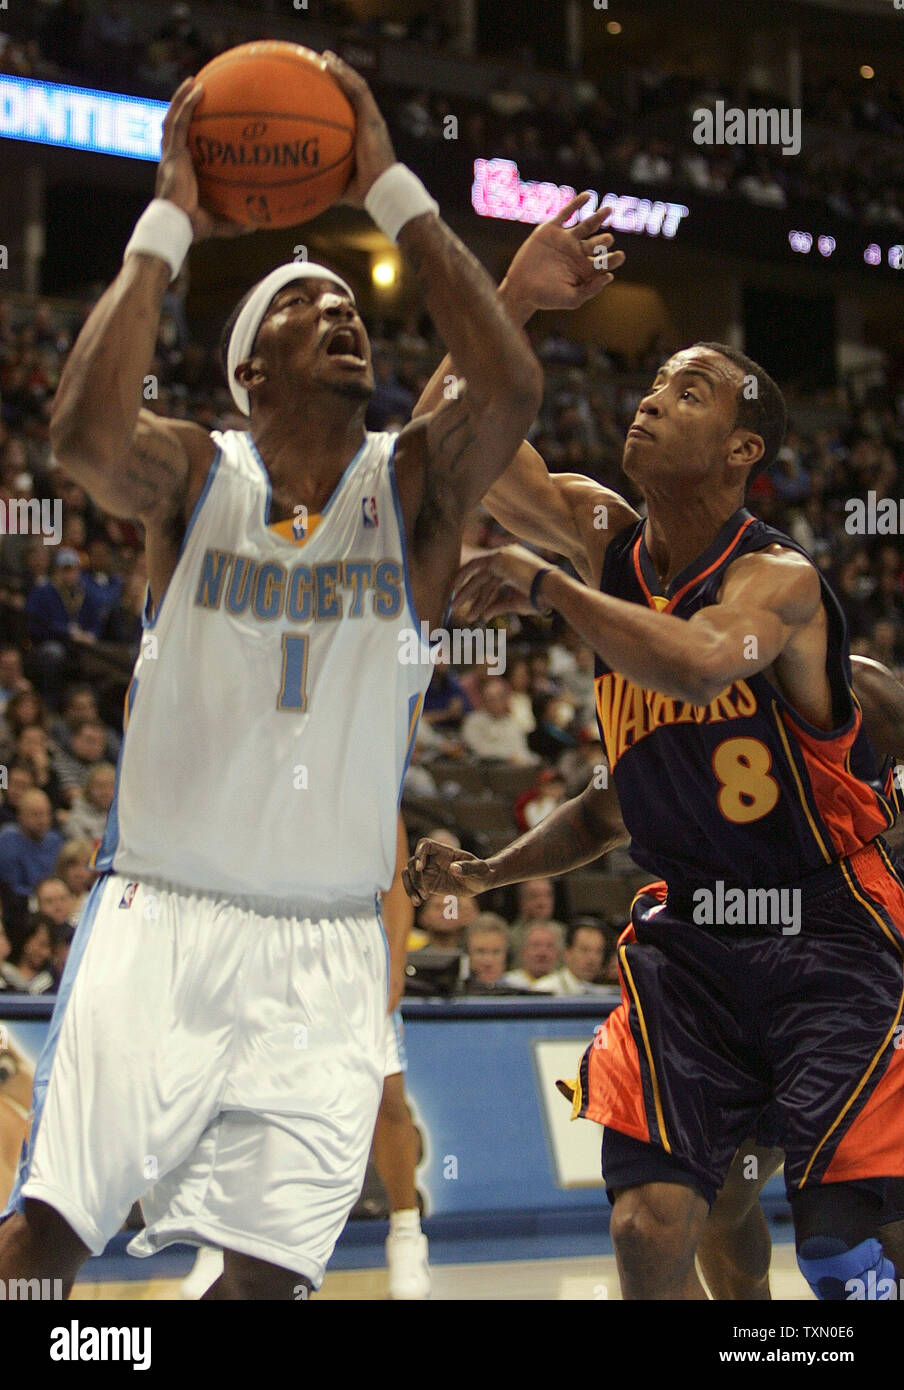 Denver Nuggets J.R. Smith (L) drives against Golden State Warriors Monta Ellis (R) in the first half of the game at the Pepsi Center in Denver on November 24, 2006. Smith scored 31 points. Denver beat Golden State 140-129.  (UPI Photo/Gary C. Caskey) Stock Photo